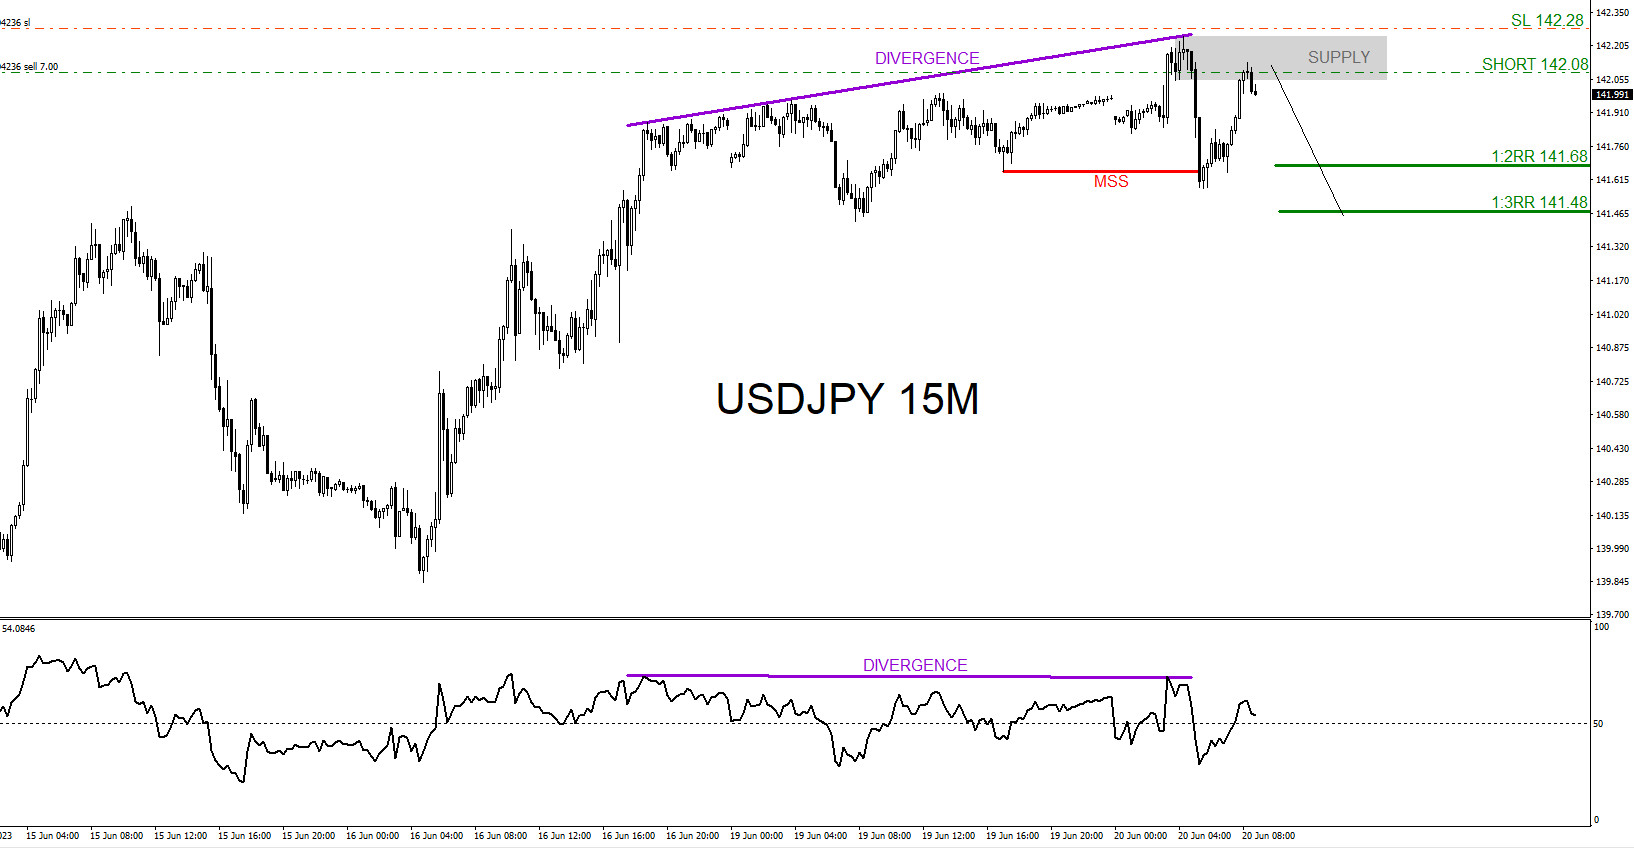 USDJPY : Catching the Move Lower